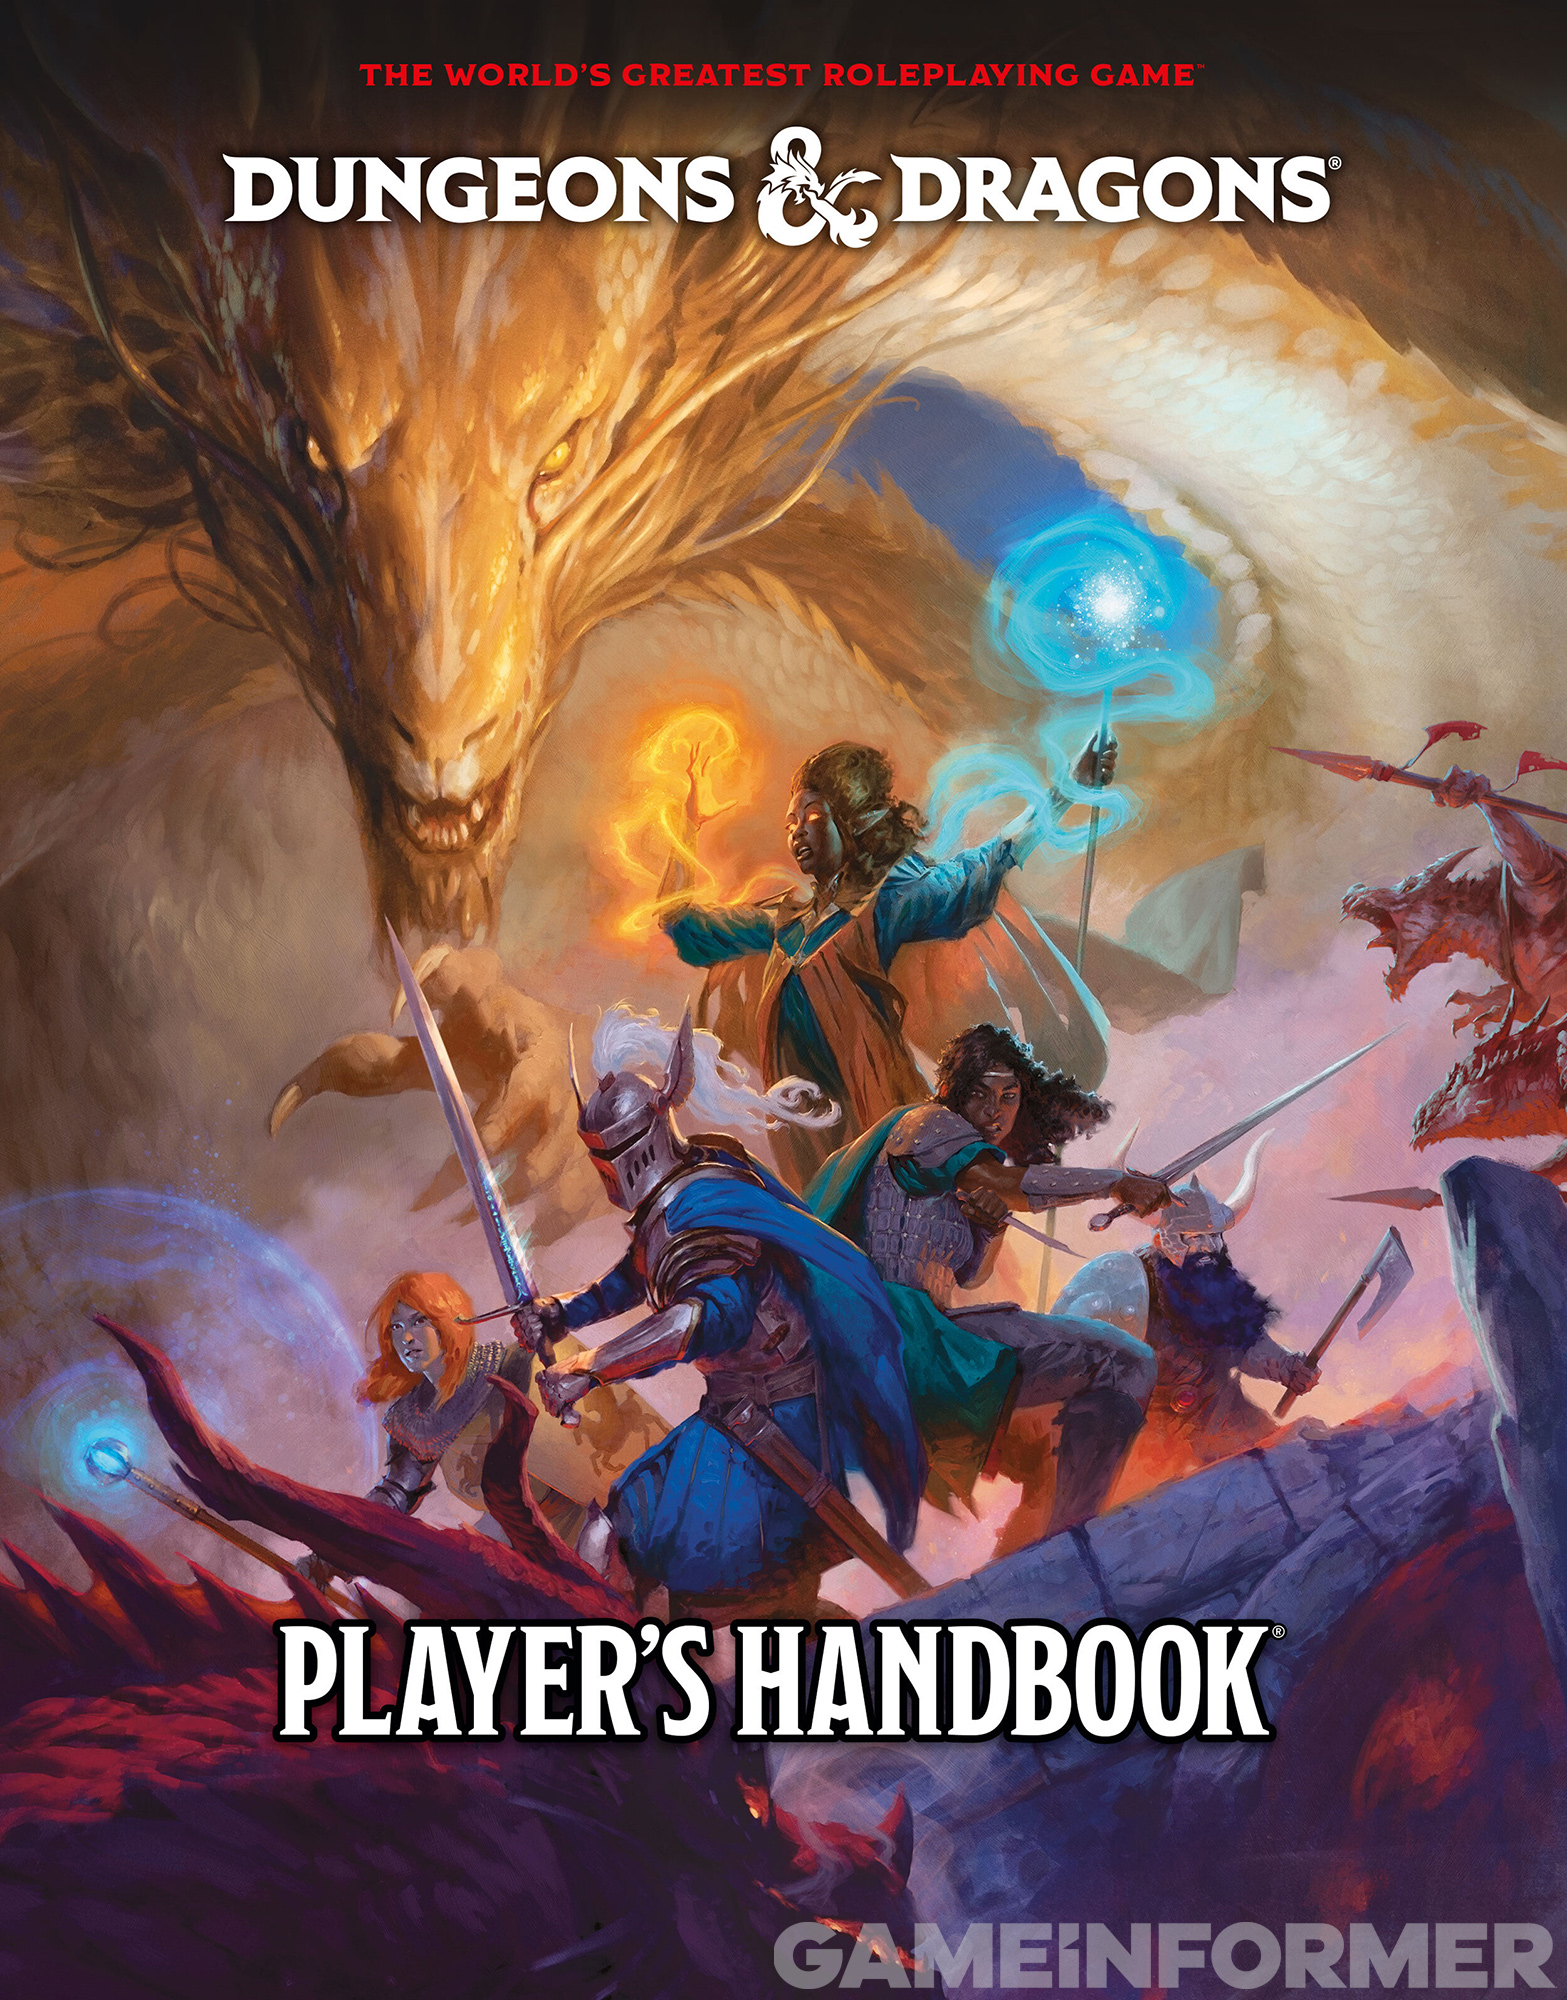 The cover artwork for Dungeons & Dragons Player's Handbook